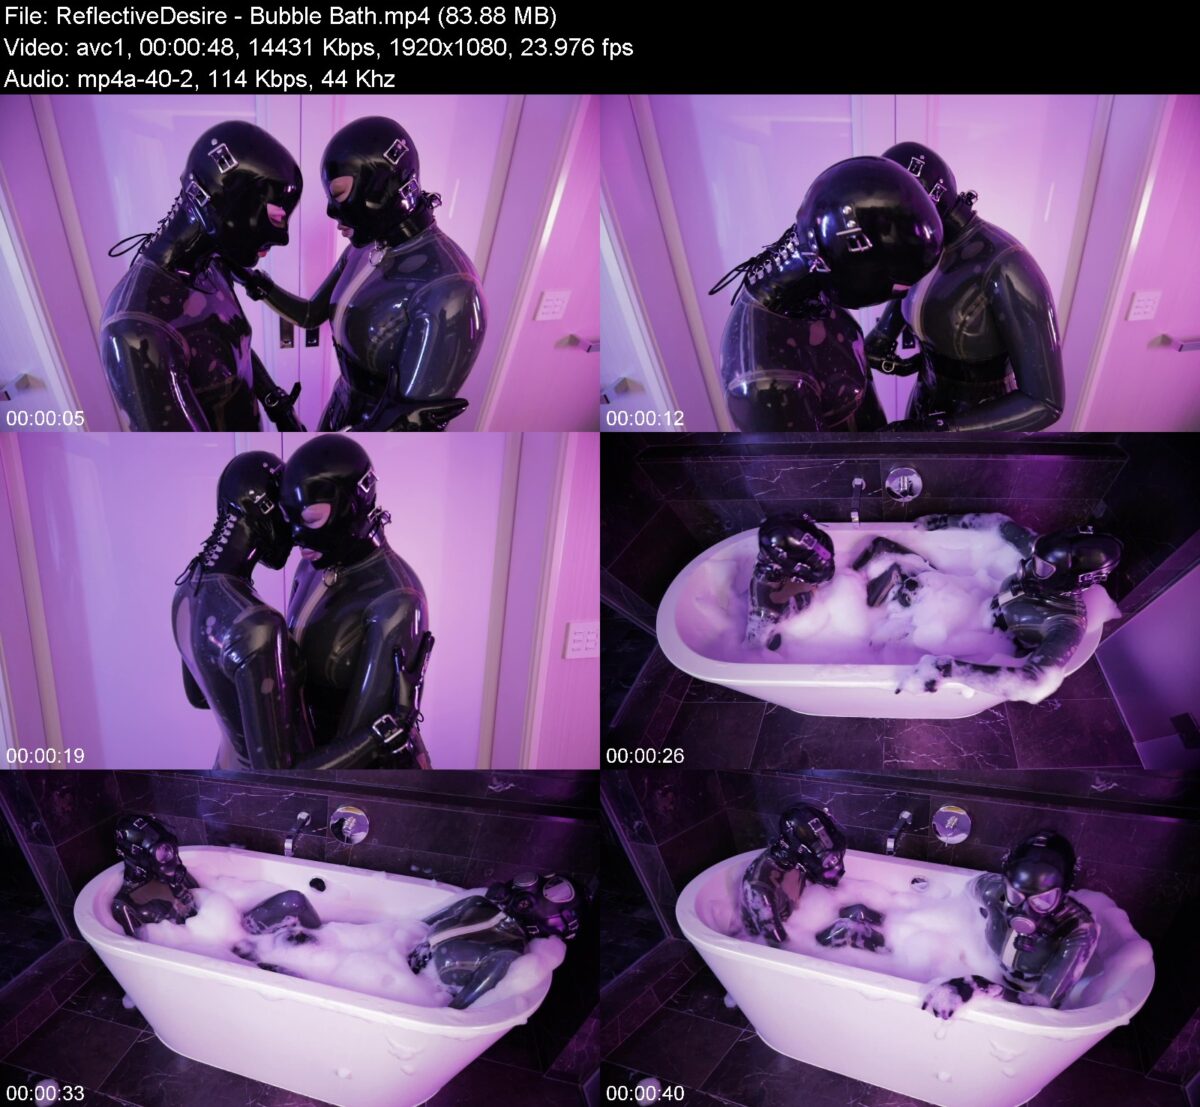 Actress: ReflectiveDesire. Title and Studio: Bubble Bath